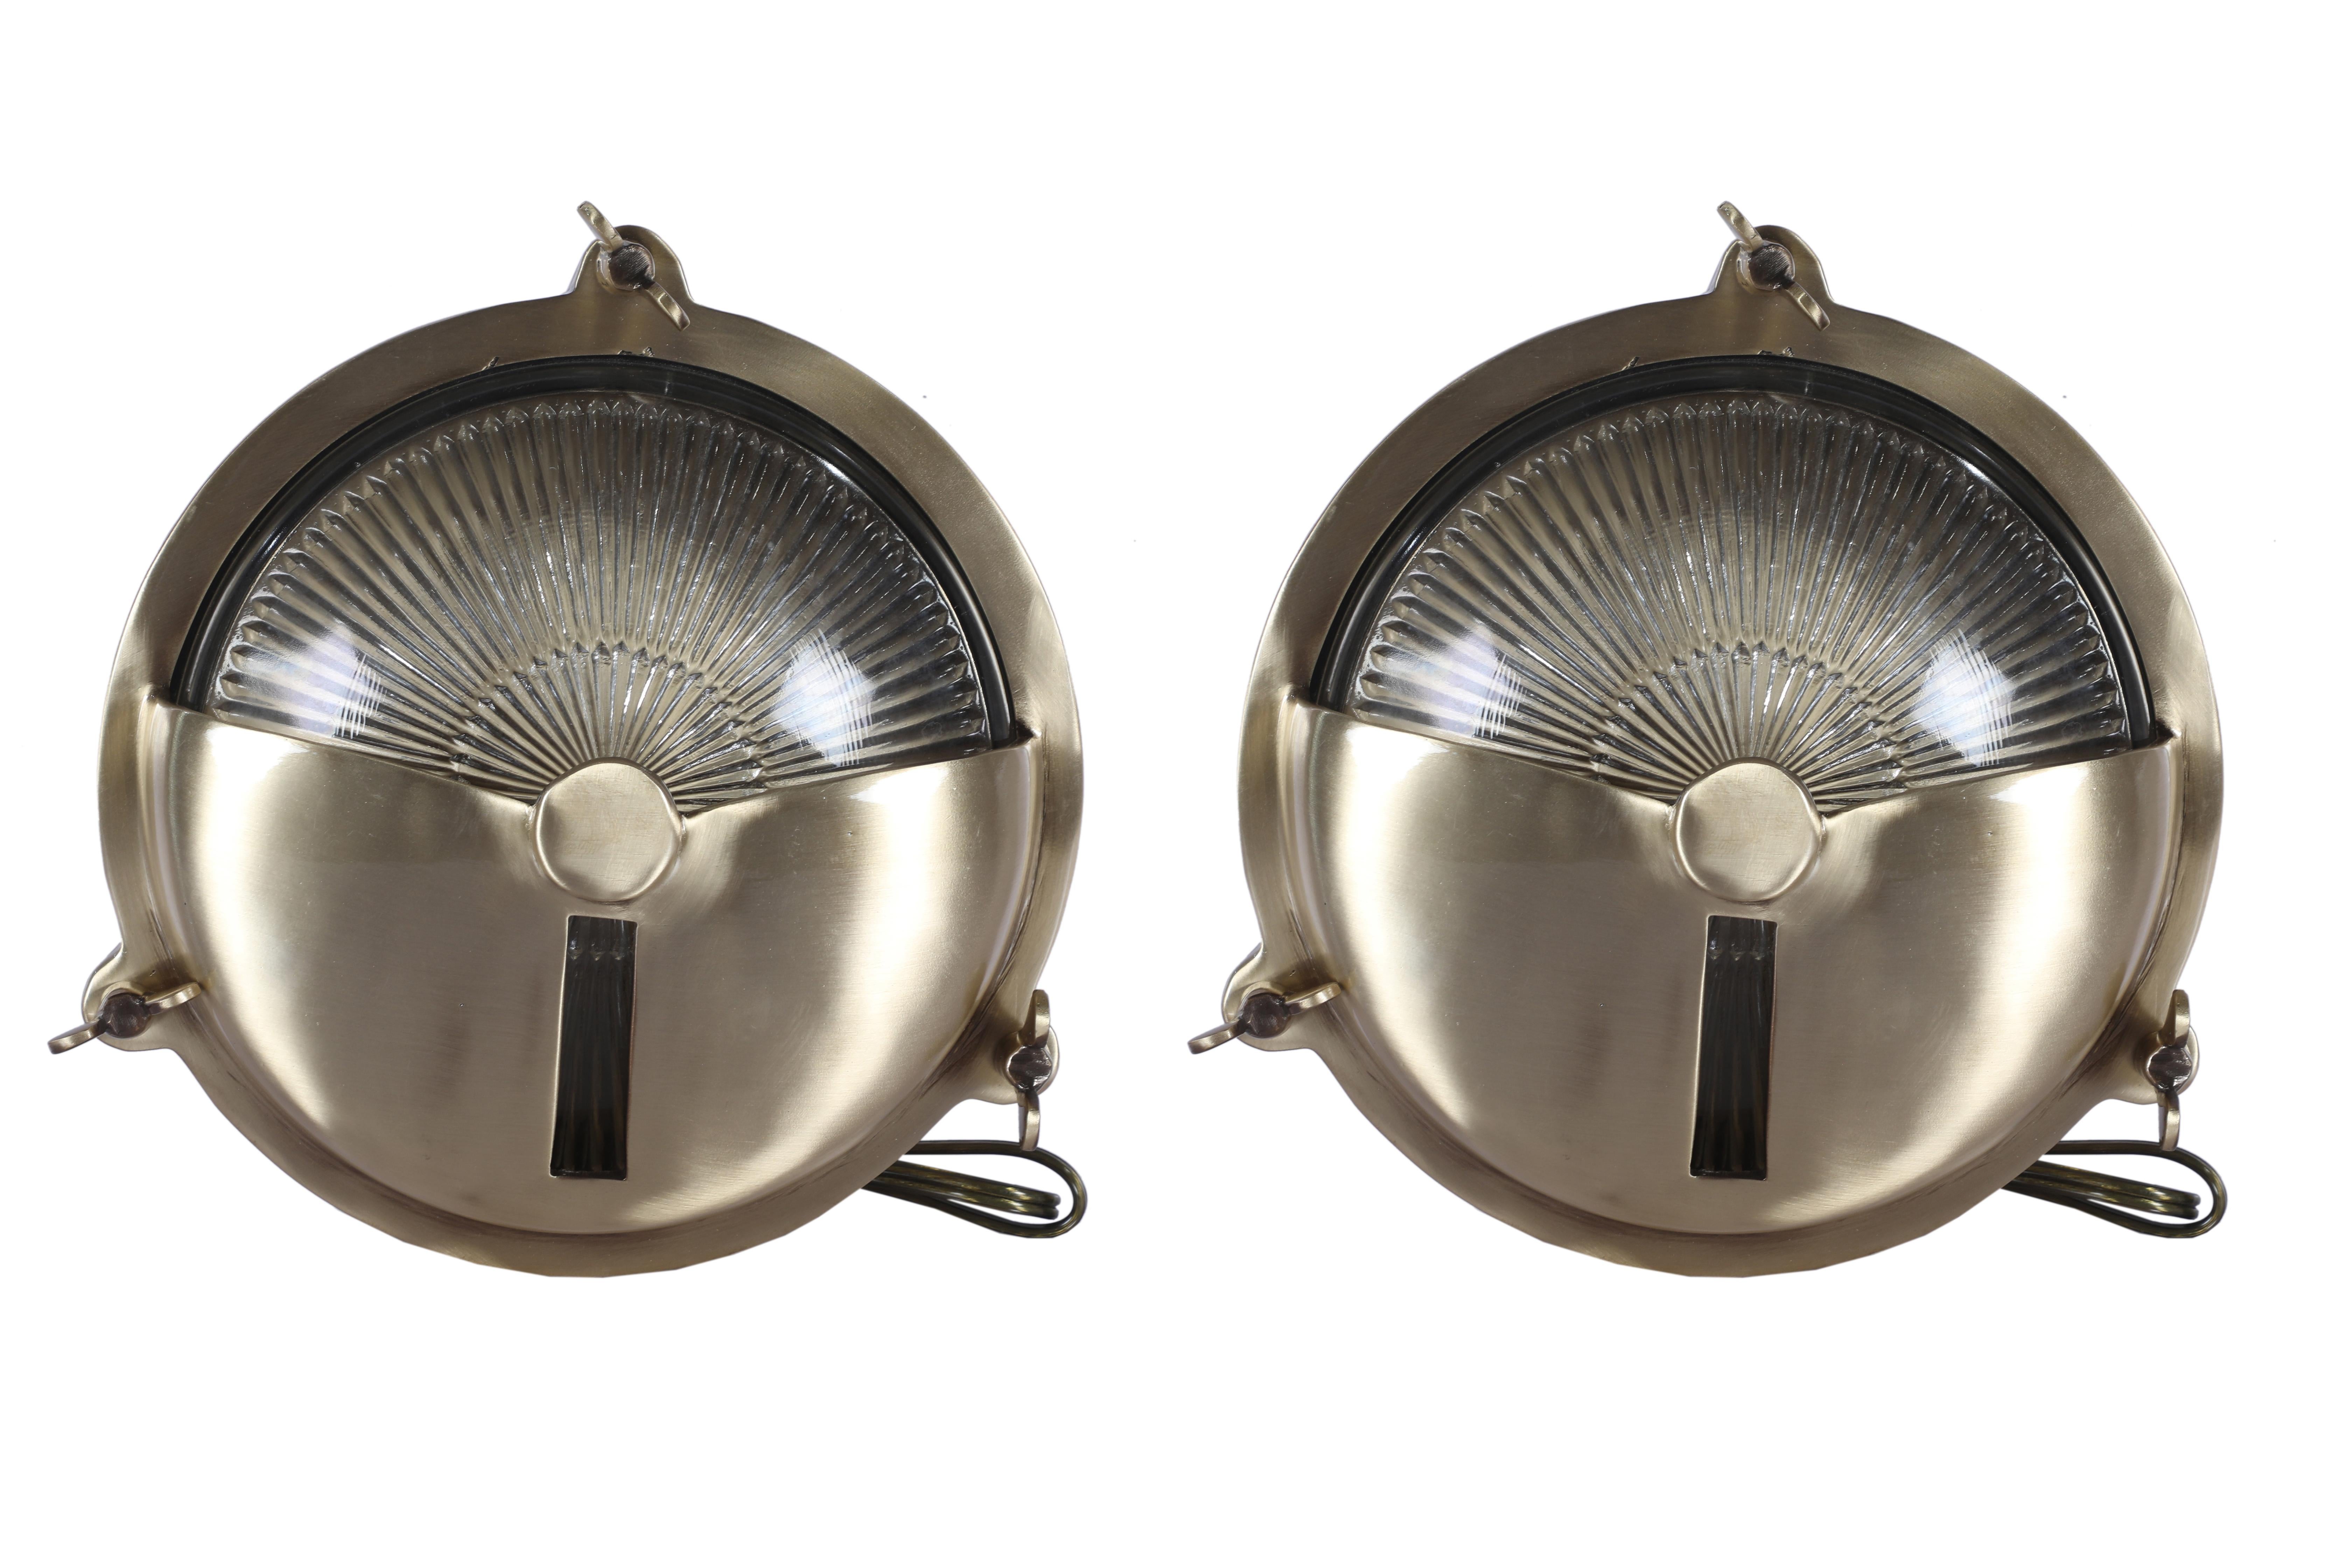 Pair of ship's passageway lights with textured glass shades and lacquered brass shades and brass backs.  Required for American use and takes a standard base light bulb.  Brackets for easy mounting and wing nuts for easy access to change the bulb. 